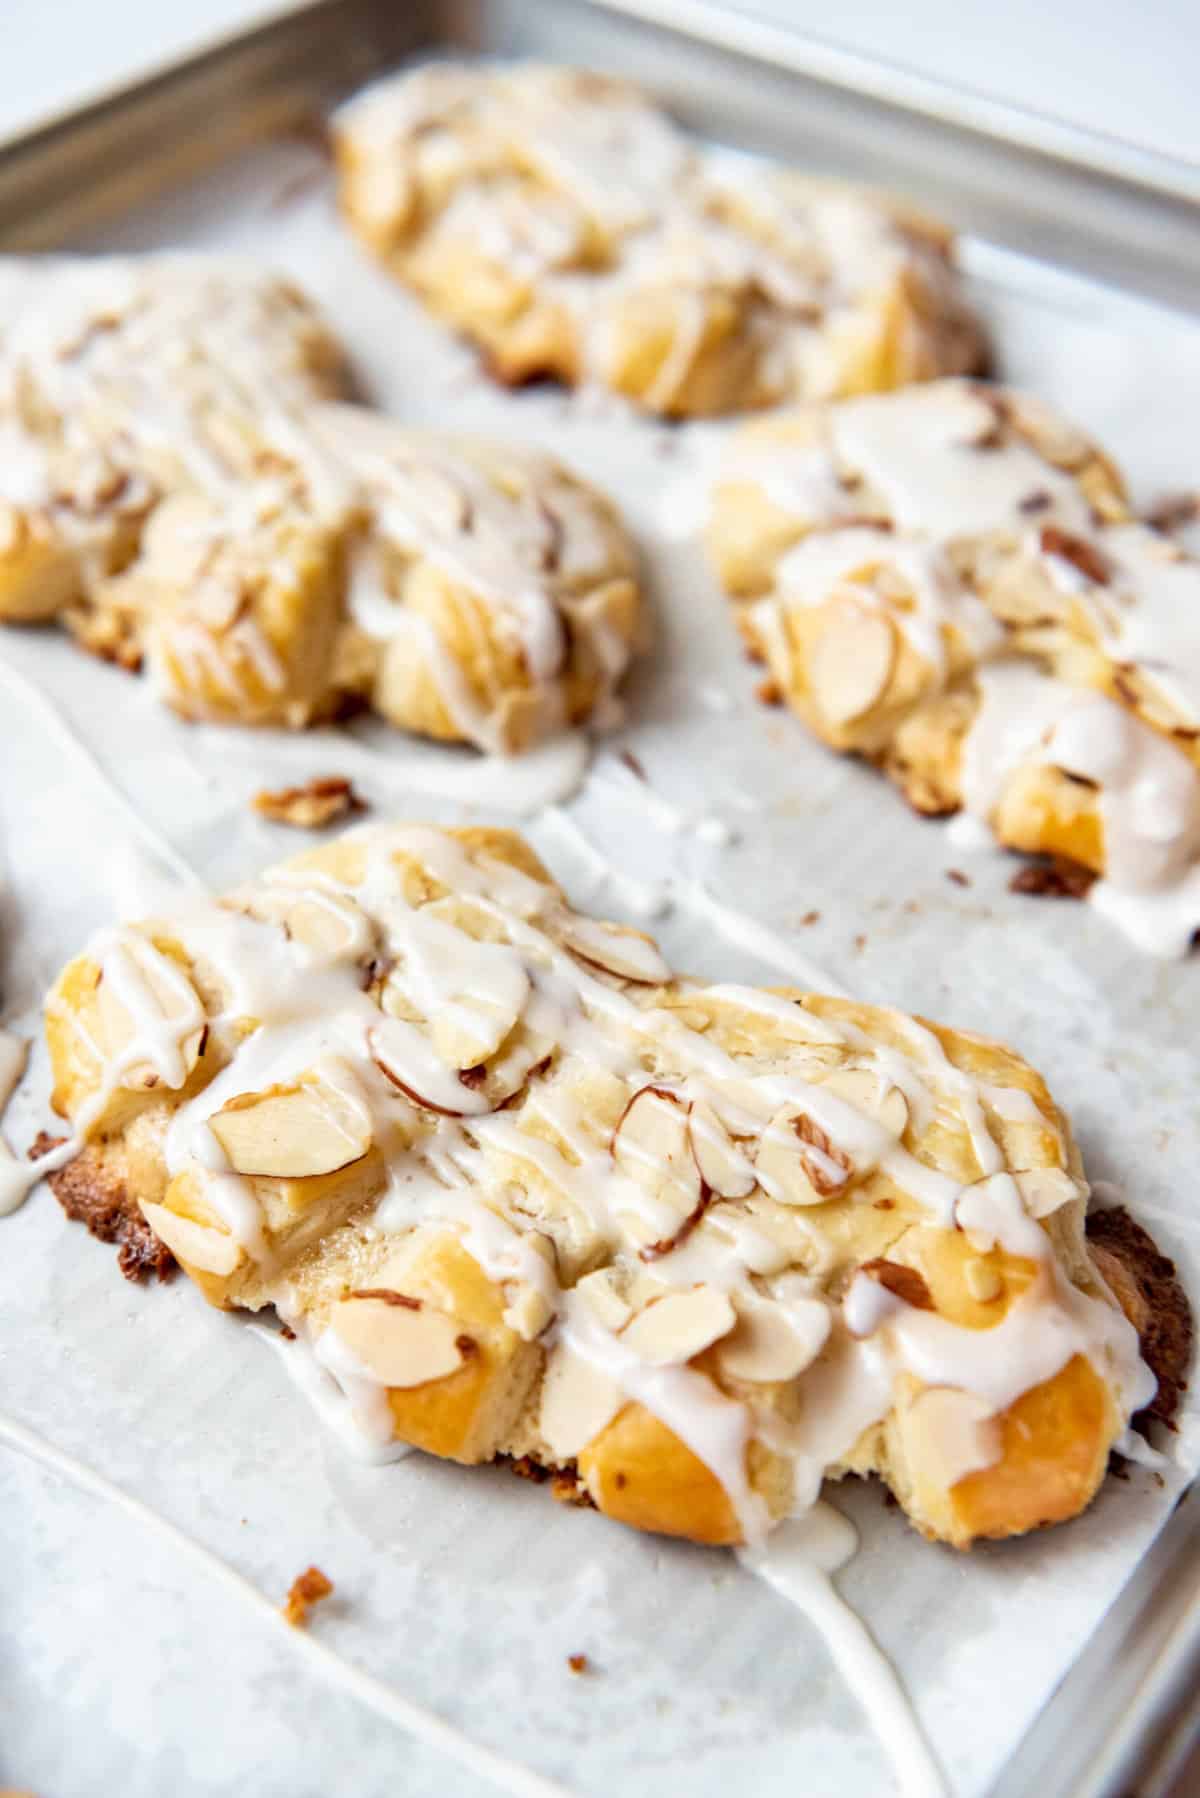 Homemade bear claws on a baking sheet lined with parchment paper.